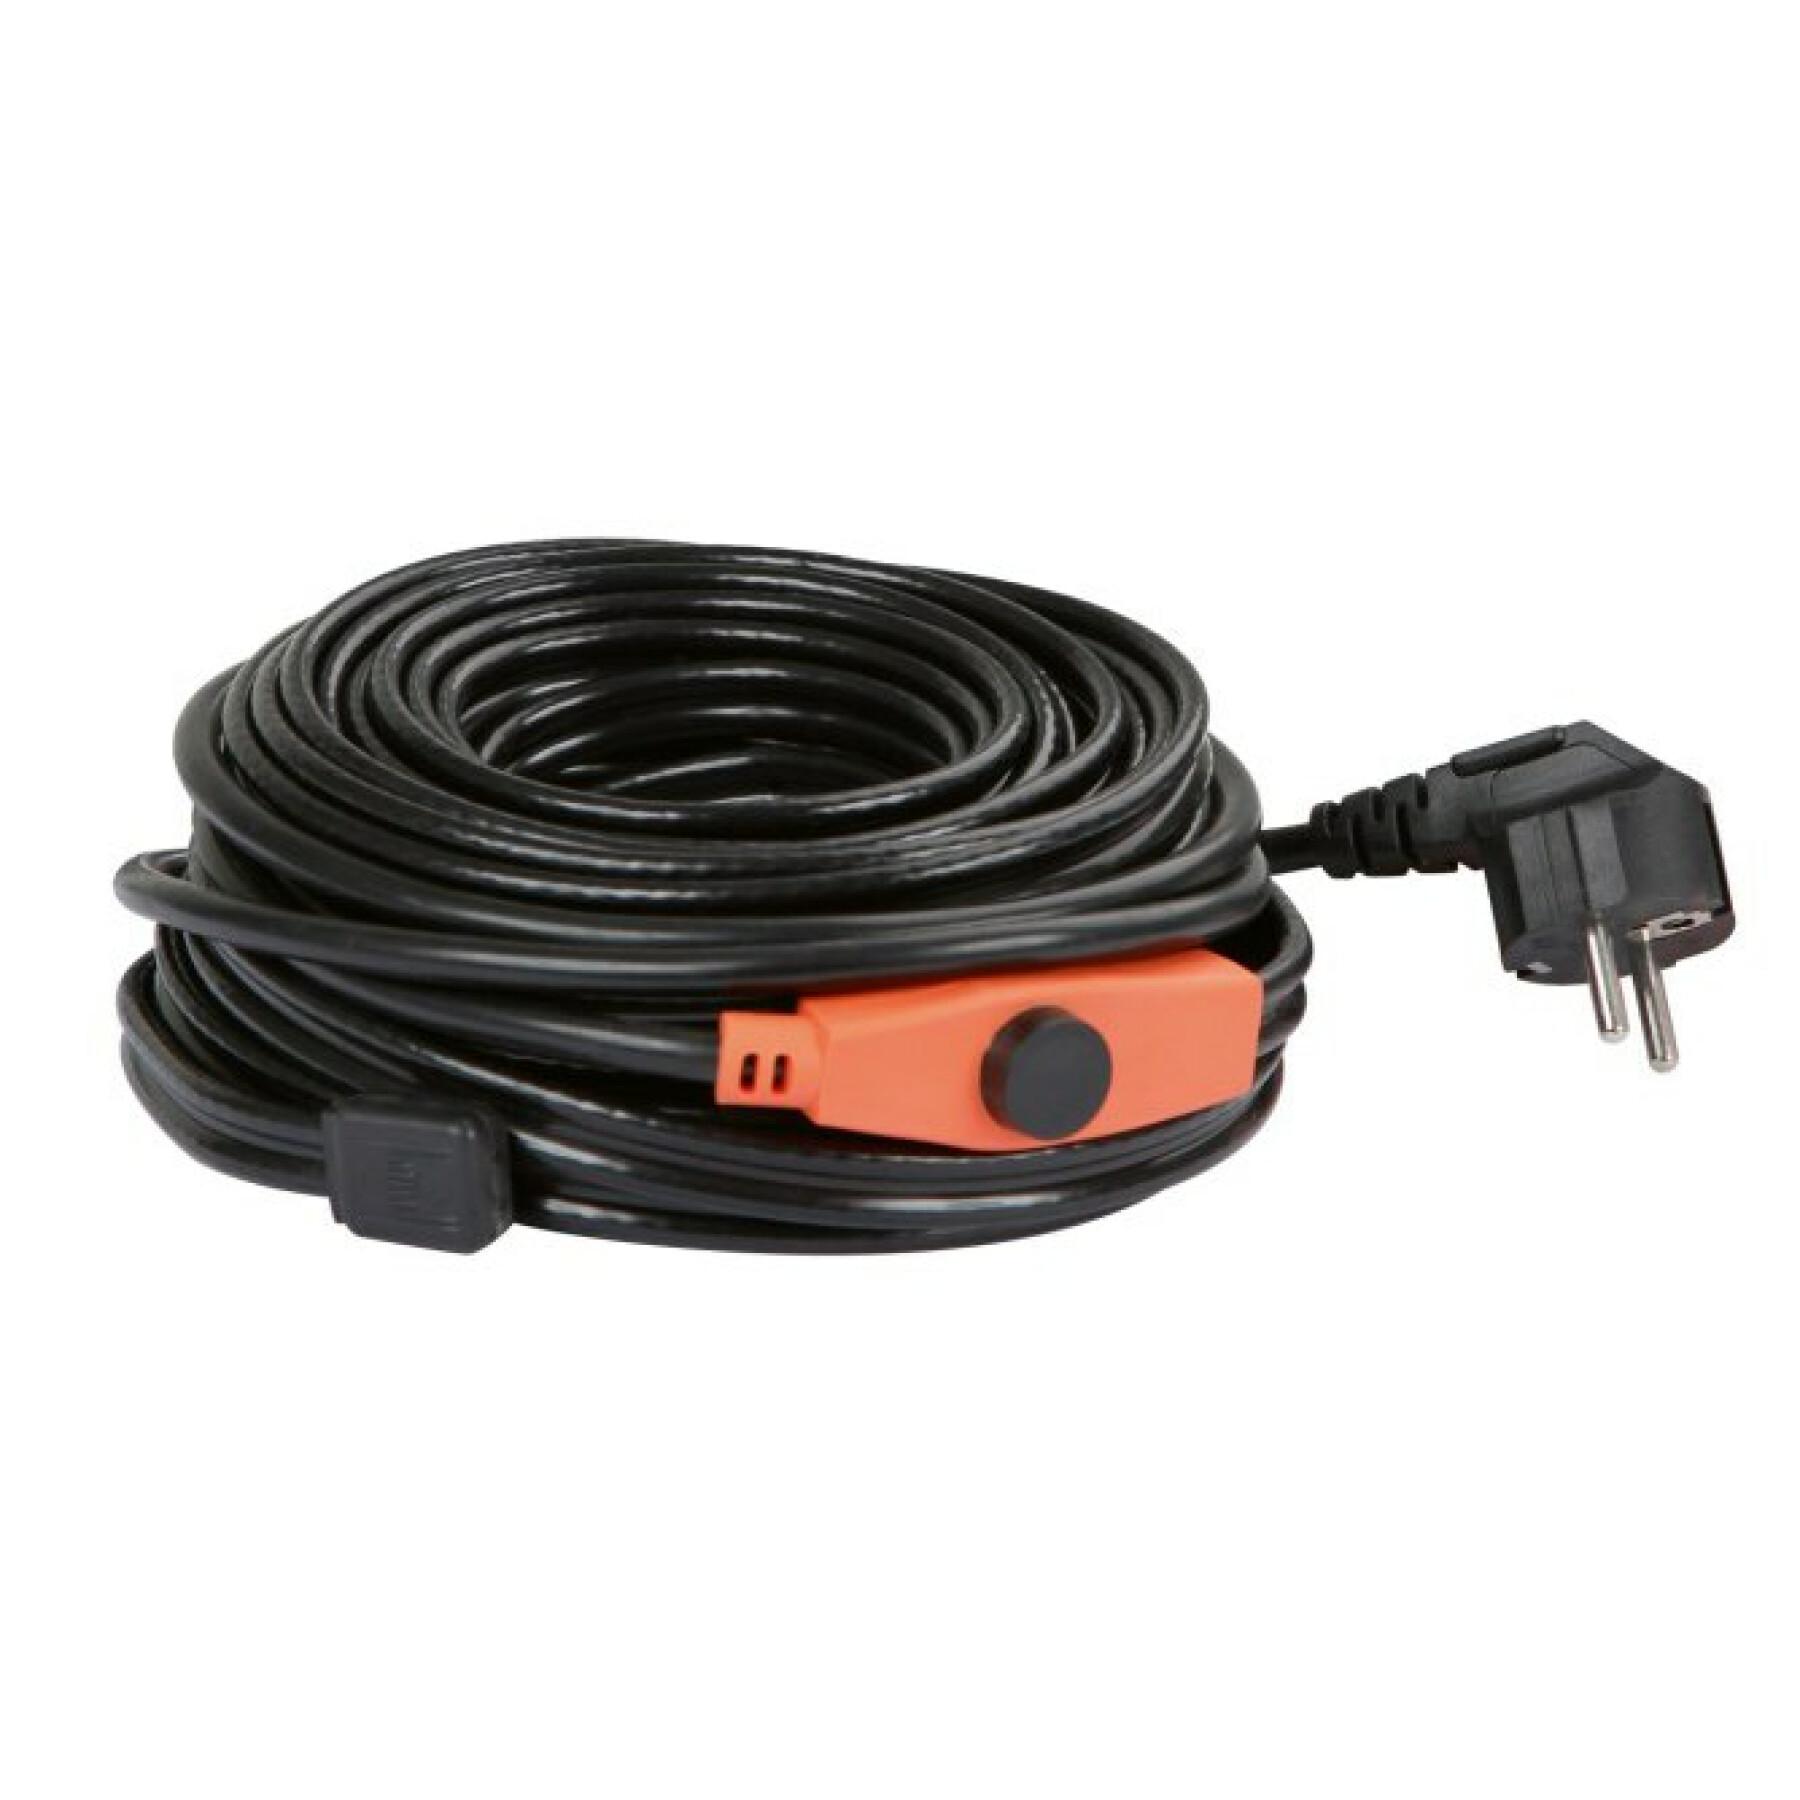 Heating cable Kerbl 230V 2m,32W